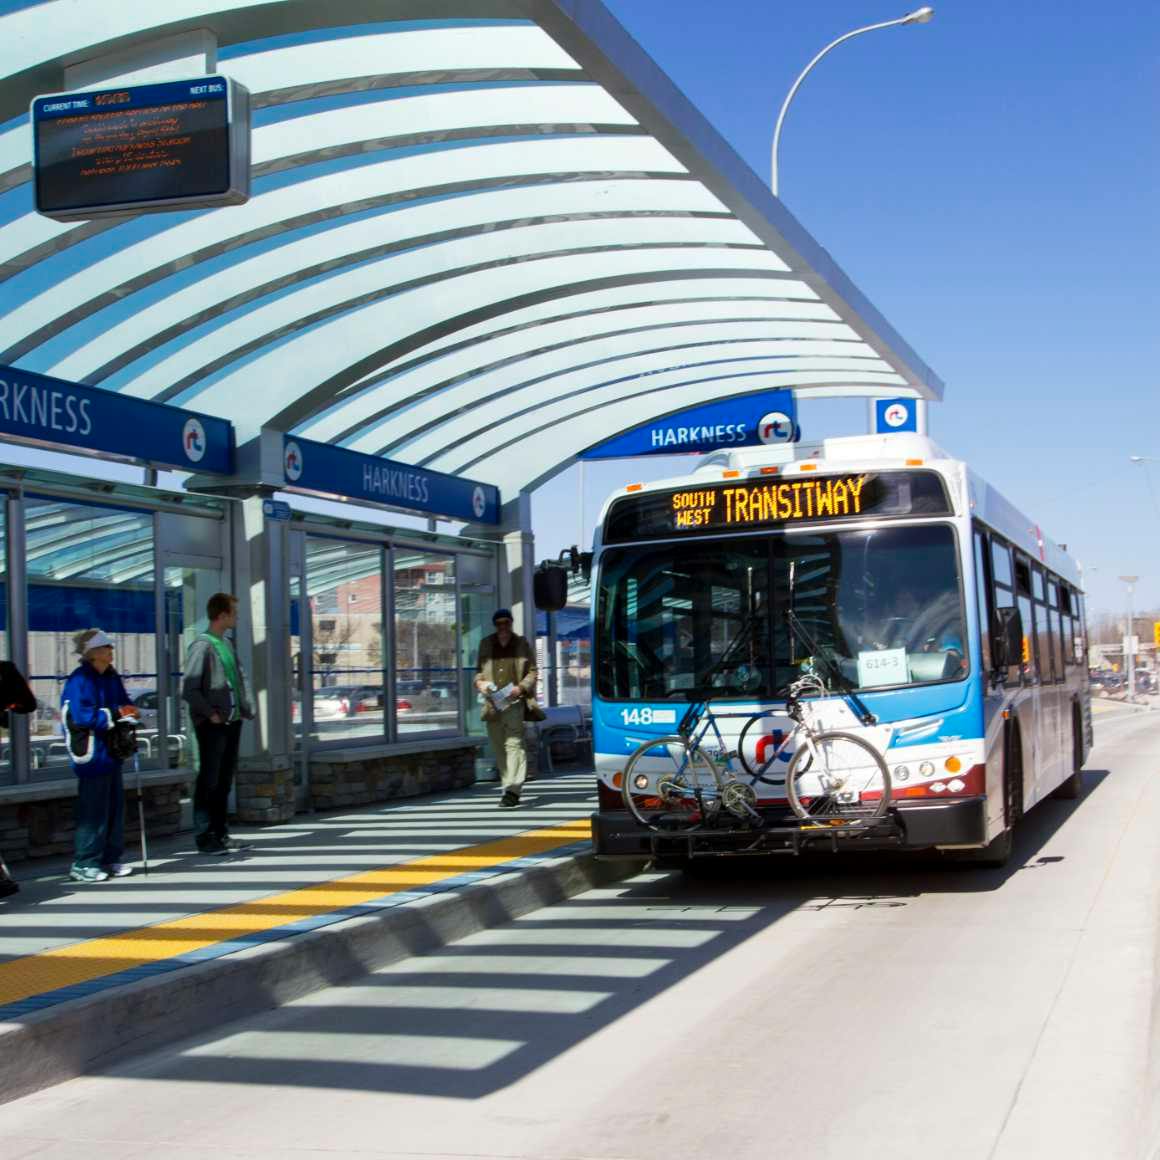 Southwest Transitway (Stage 2) is under budget and ahead of schedule image